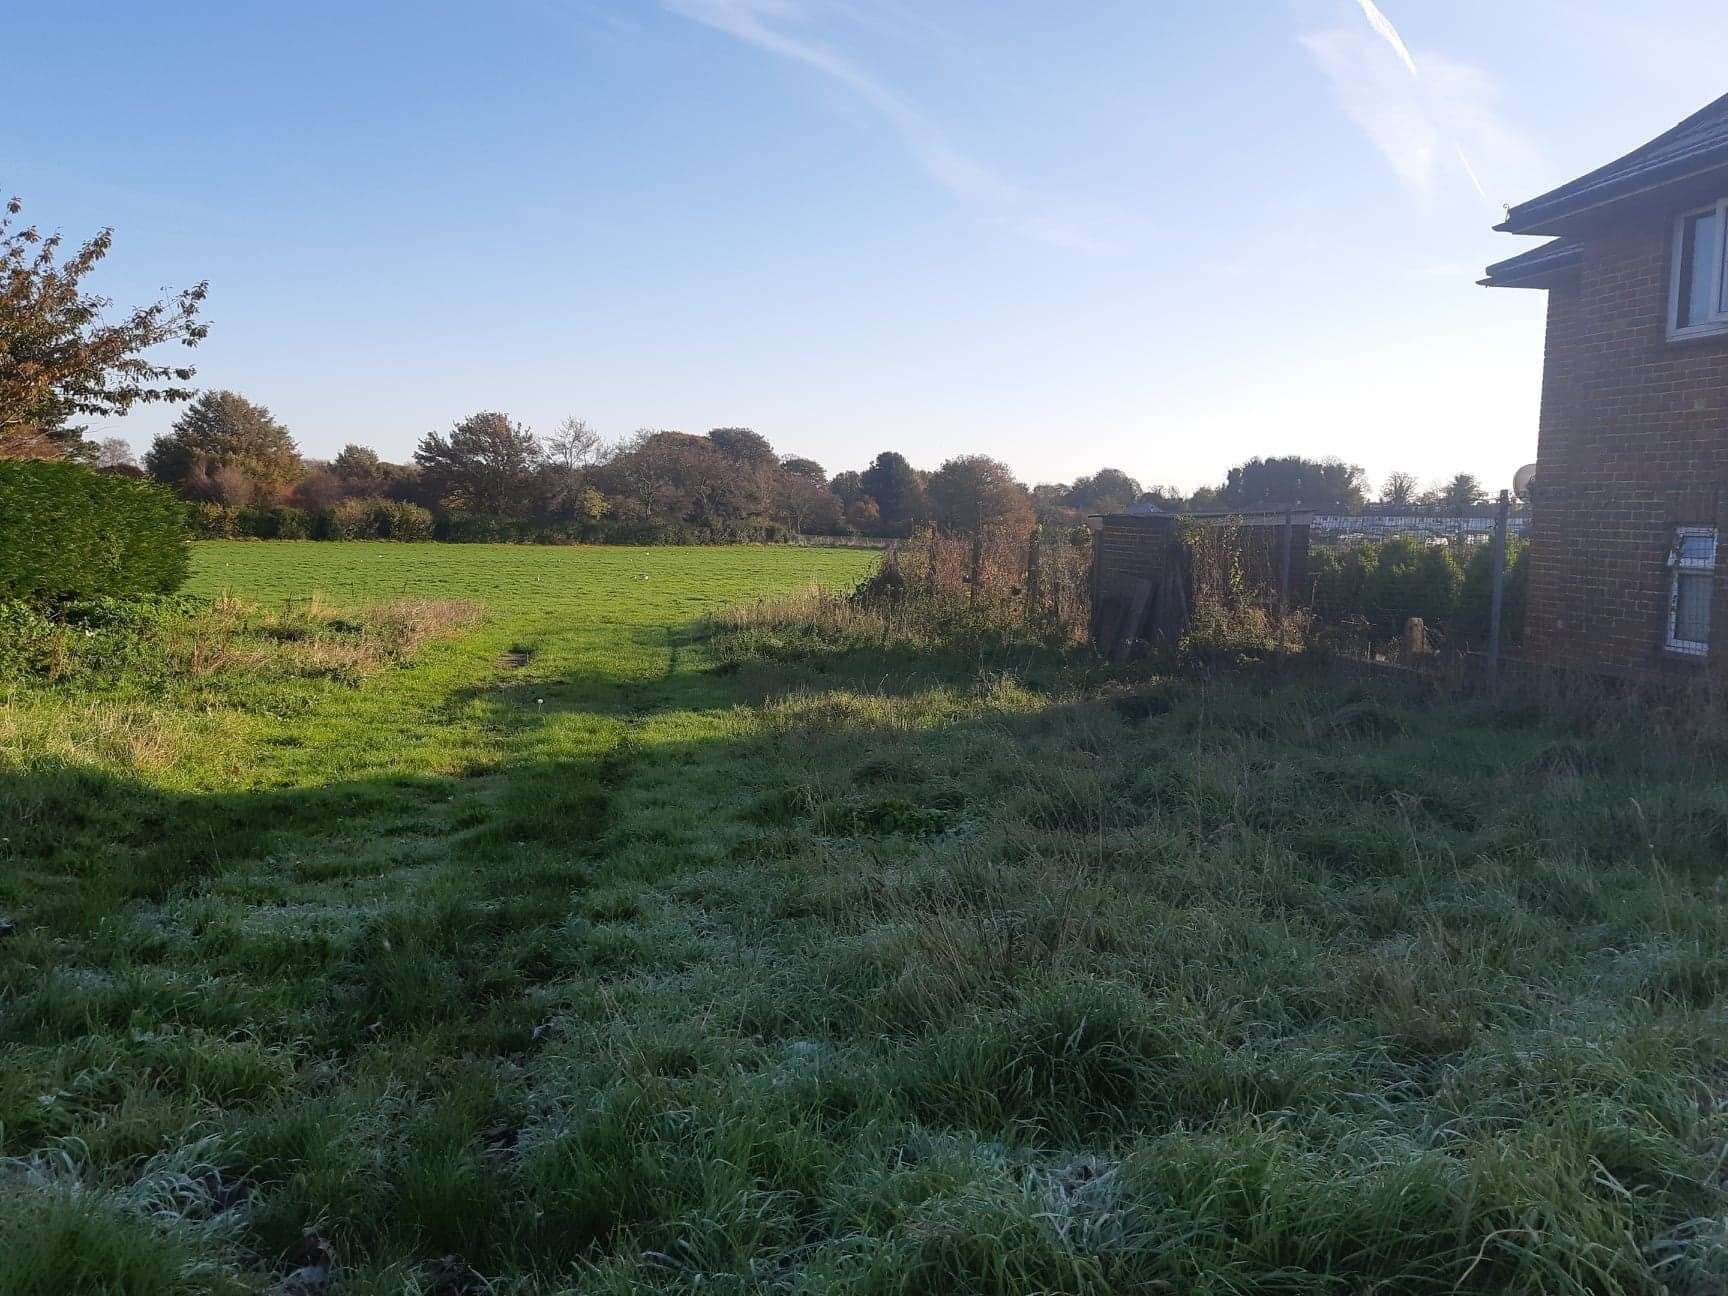 Plans for 88 homes have been submitted on land off Freemens Way in Deal